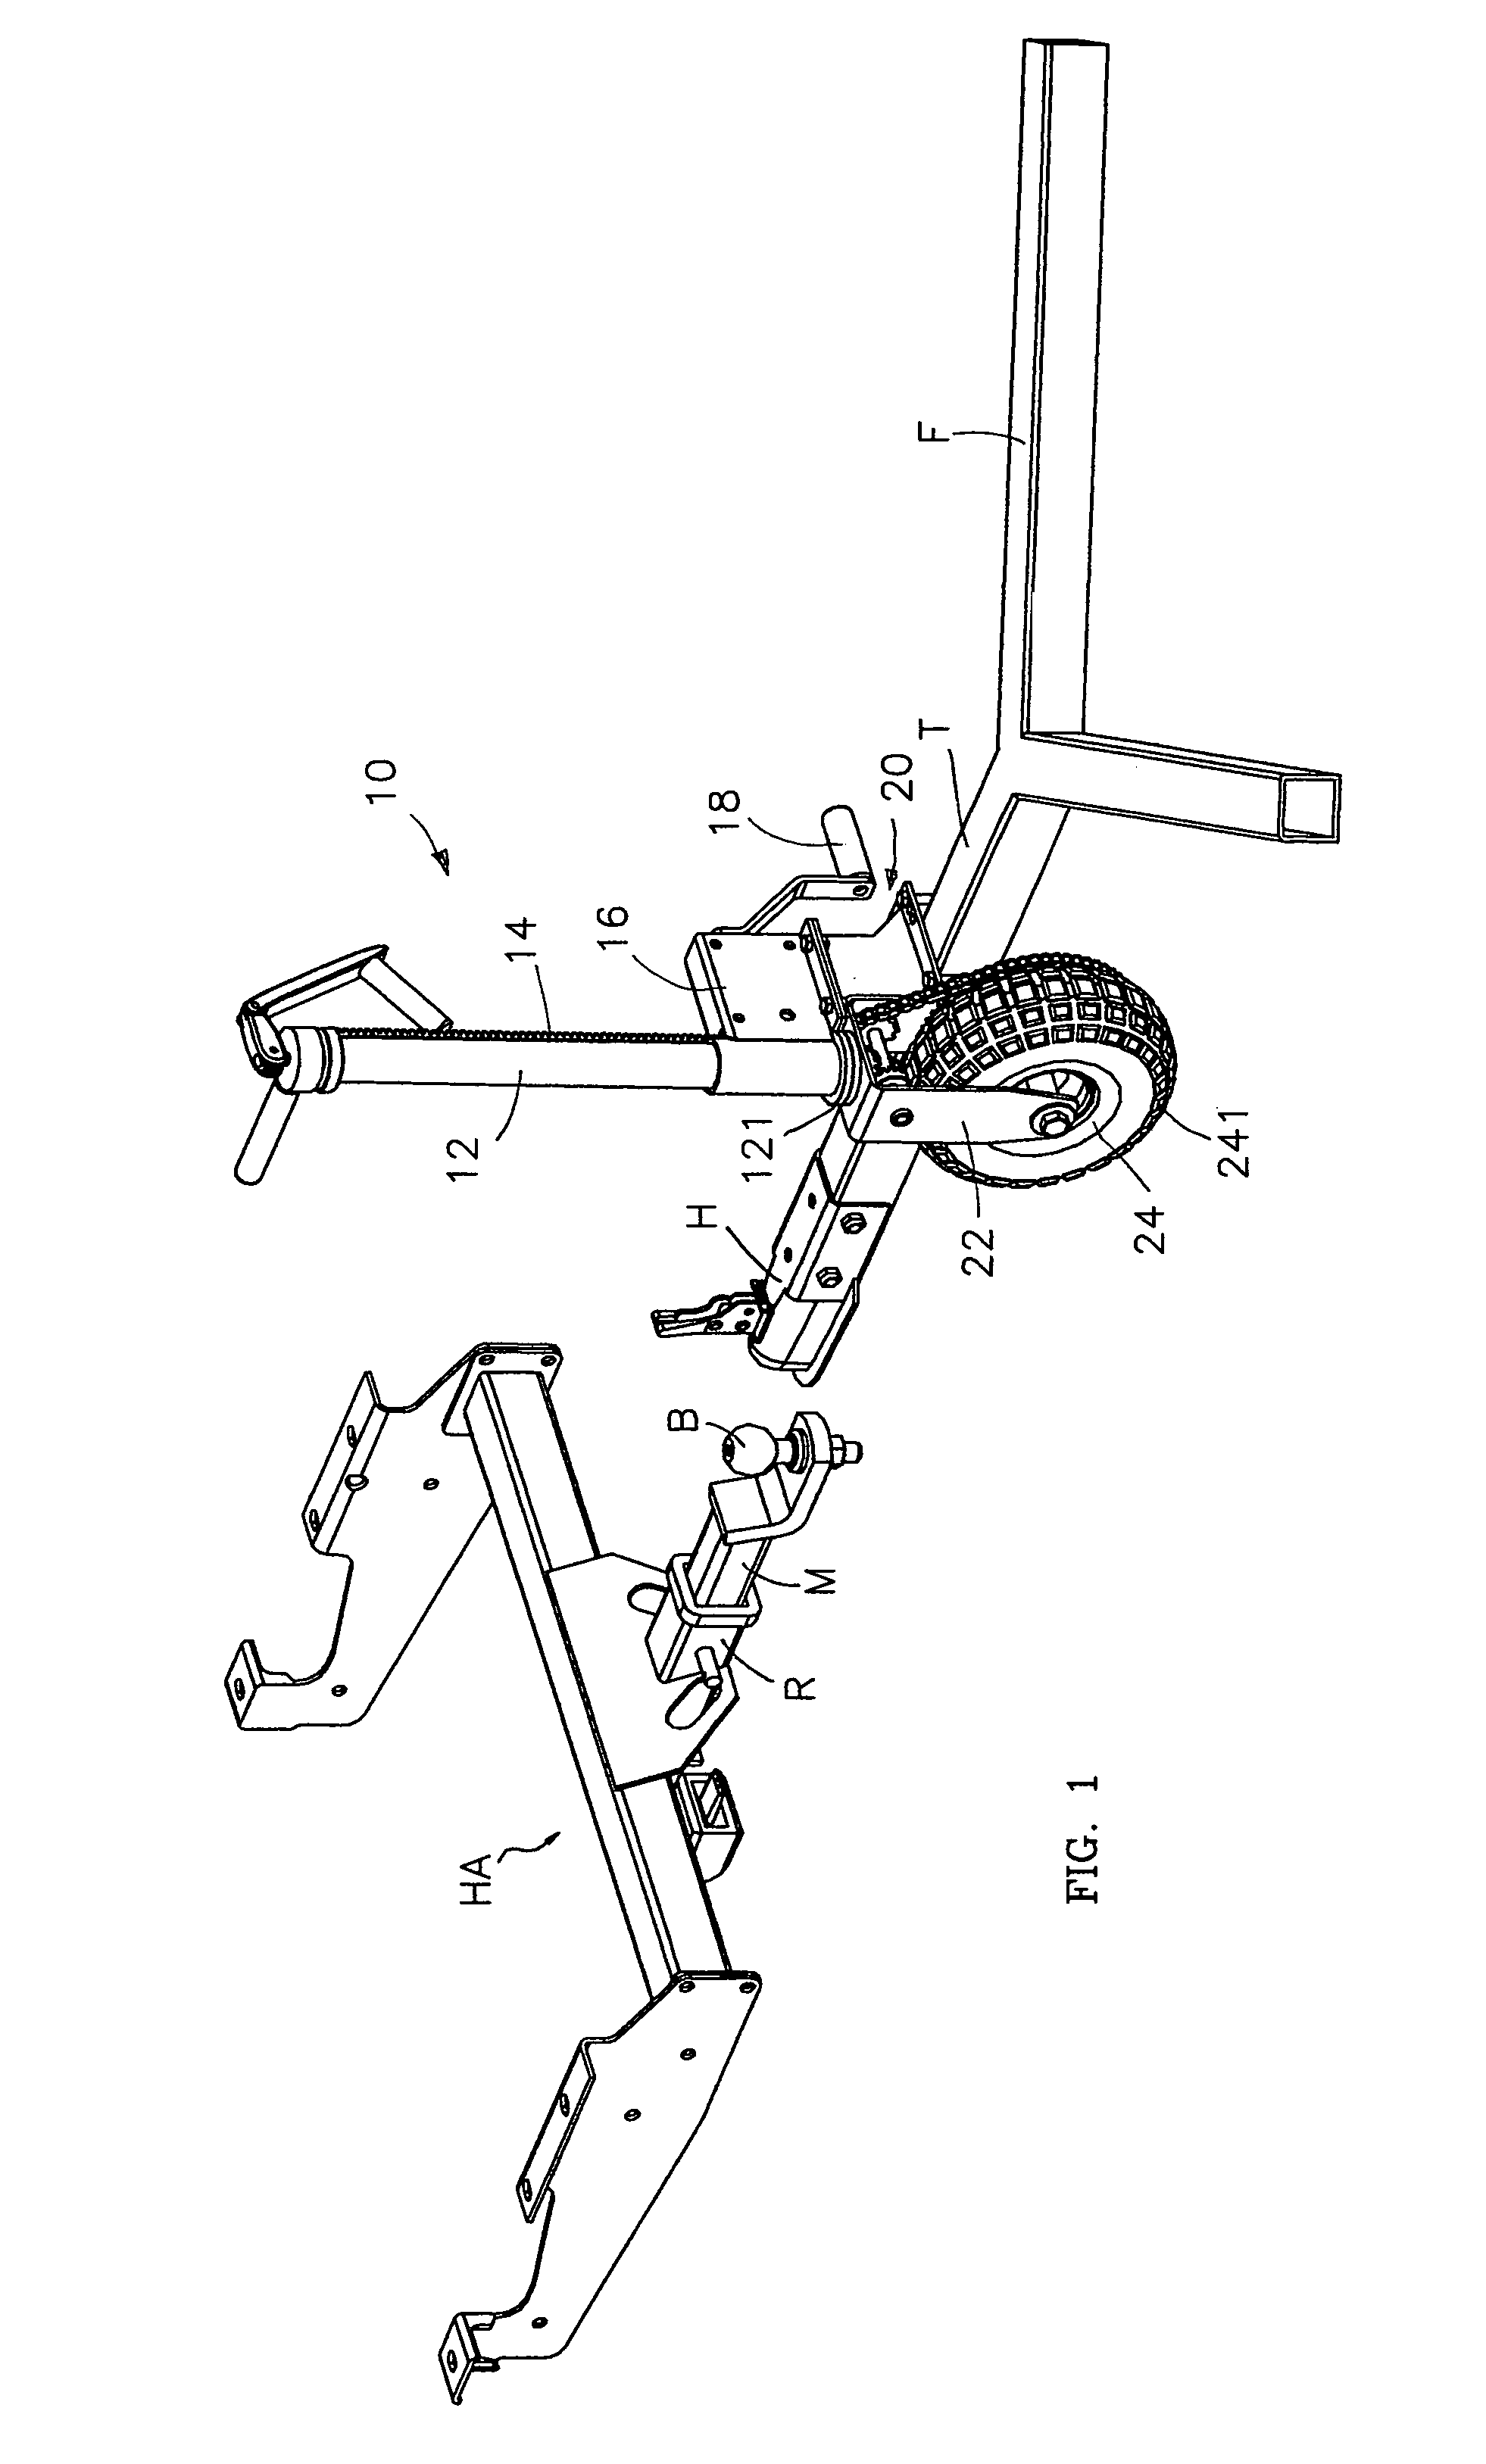 Powered maneuverable and retractable trailer jack device